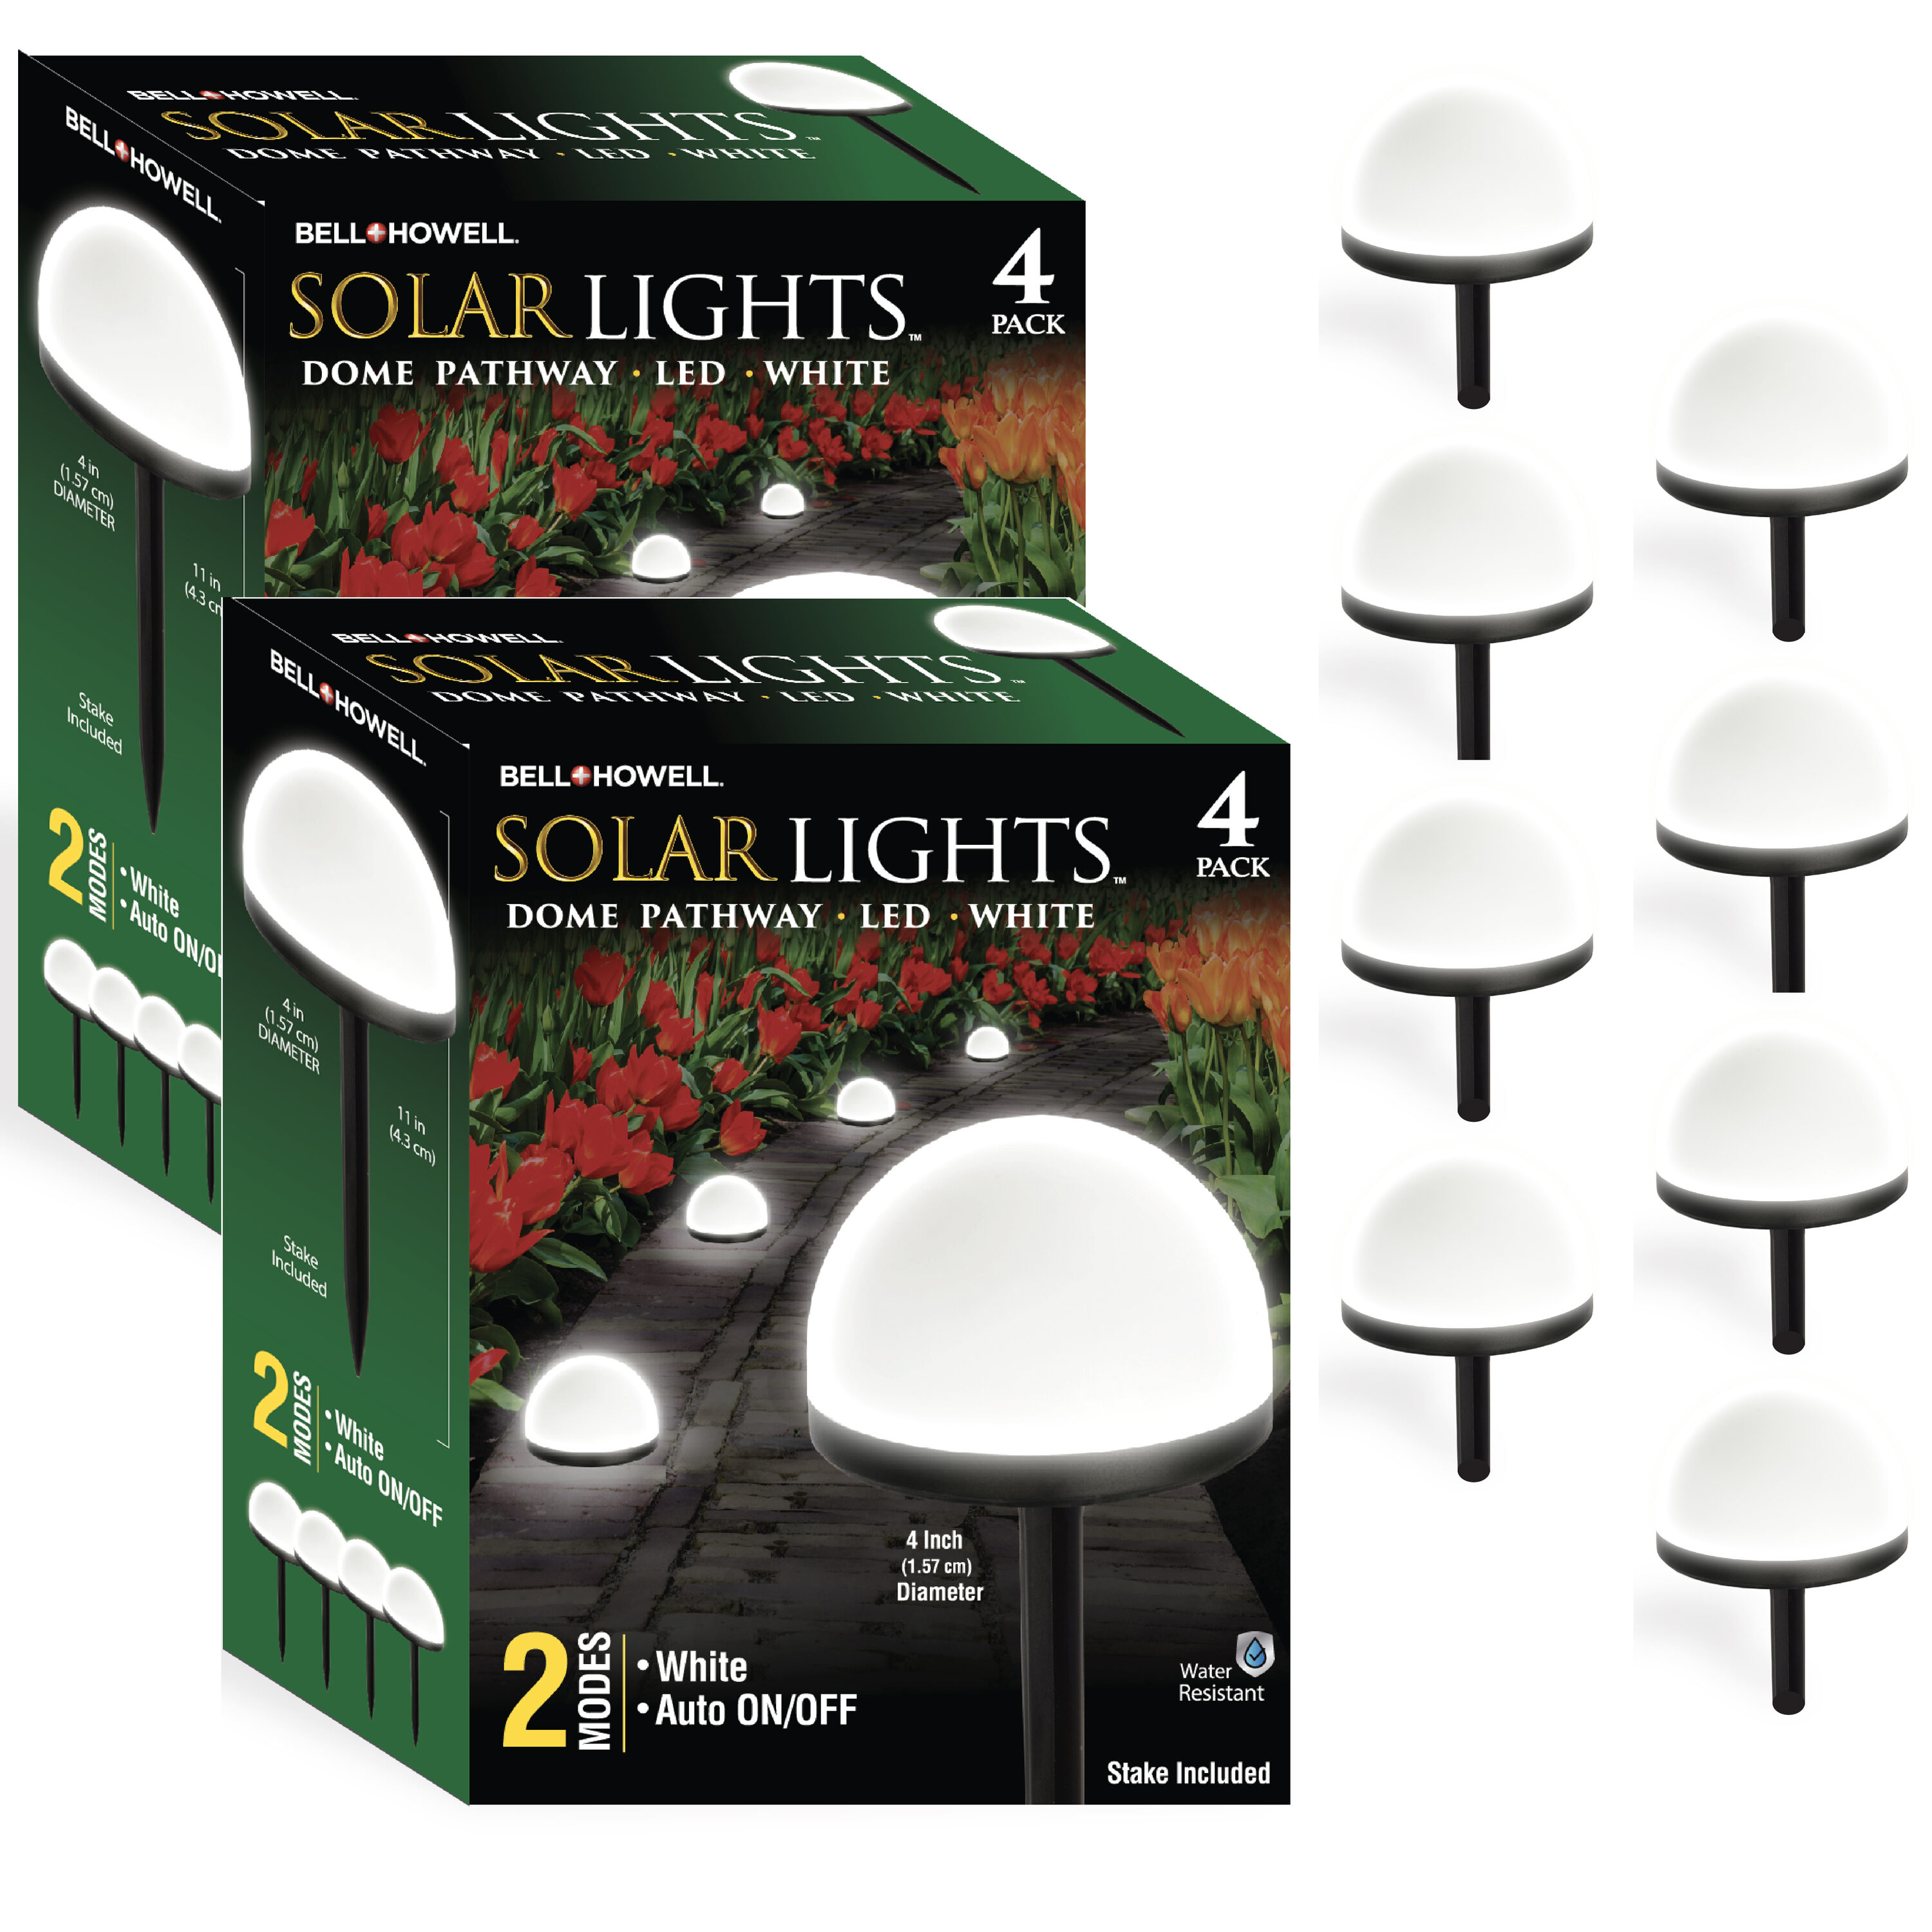 BELL + HOWELL 8-Pack Color Changing Wall Light 10-Lumen 2-Watt Black Low  Voltage Solar LED Outdoor Path Light in the Path Lights department at